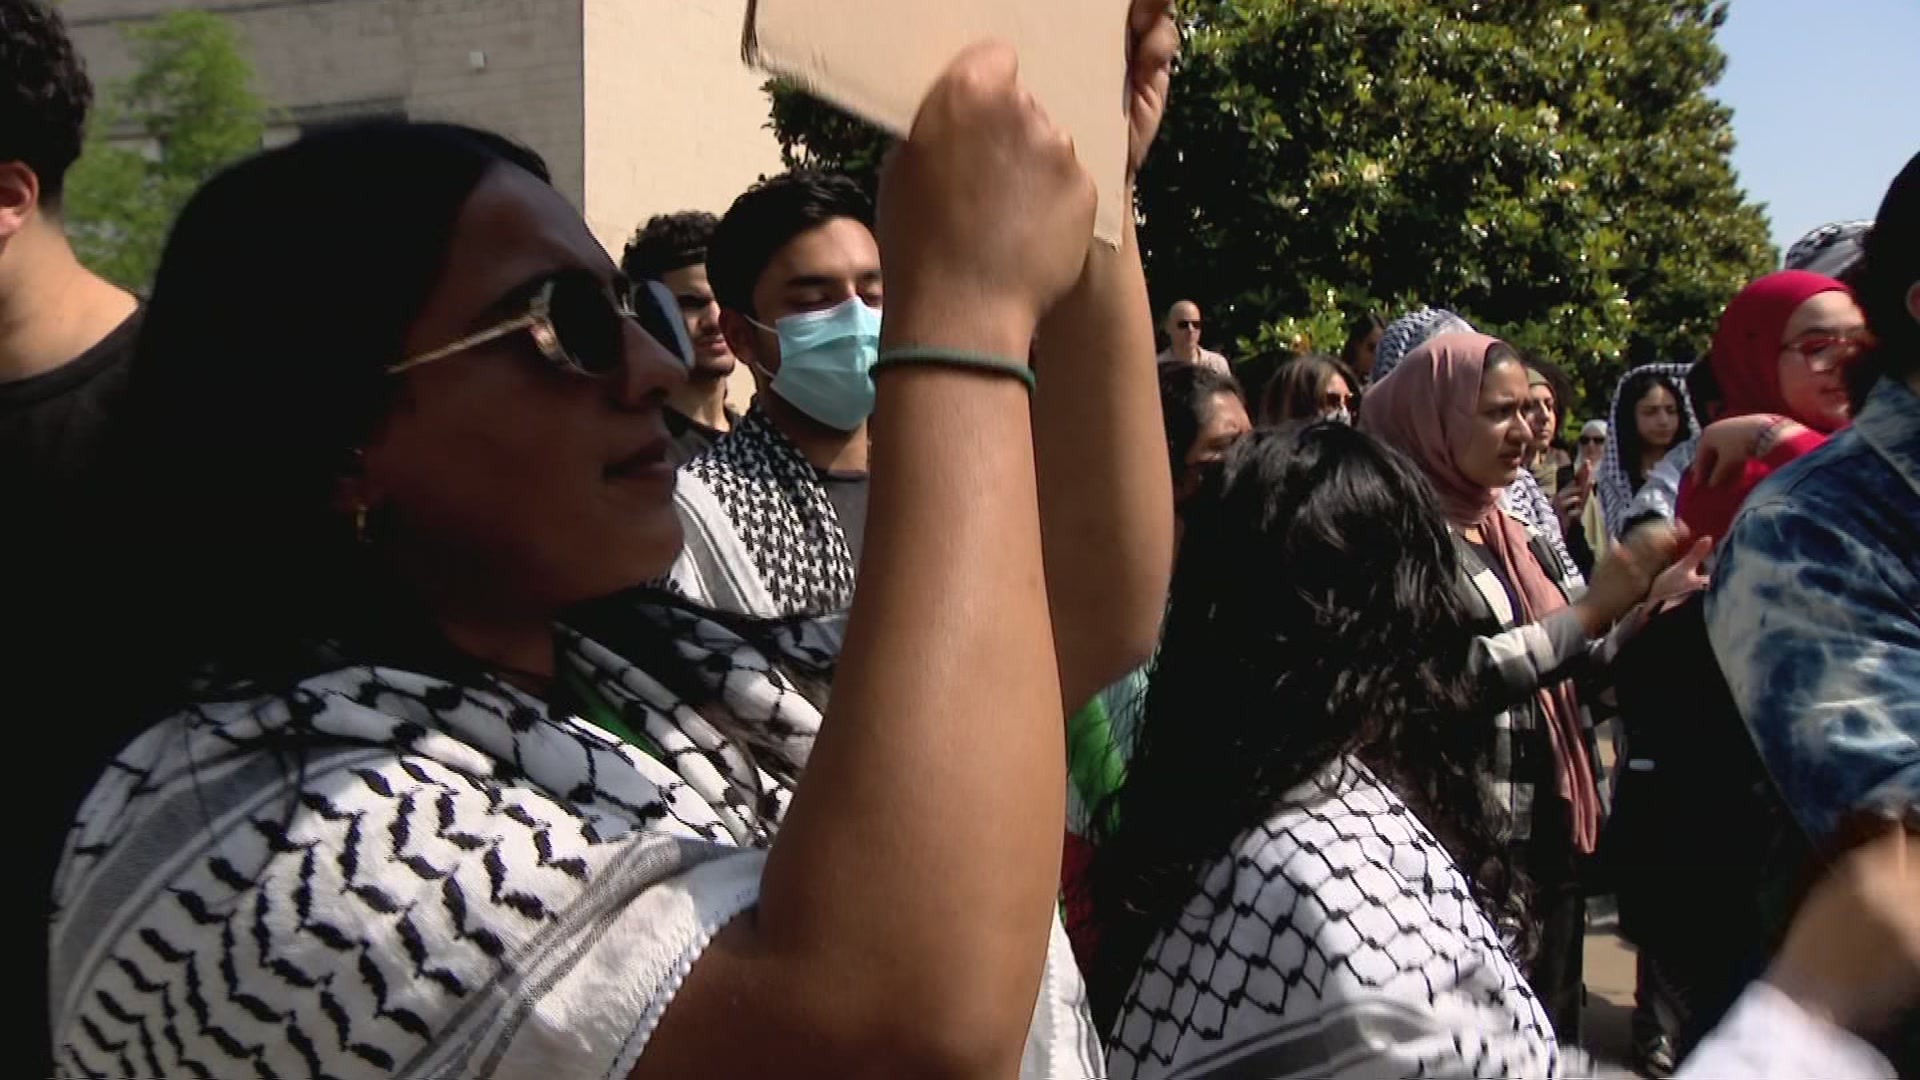 Protest resumes at UT Dallas following arrests earlier in week